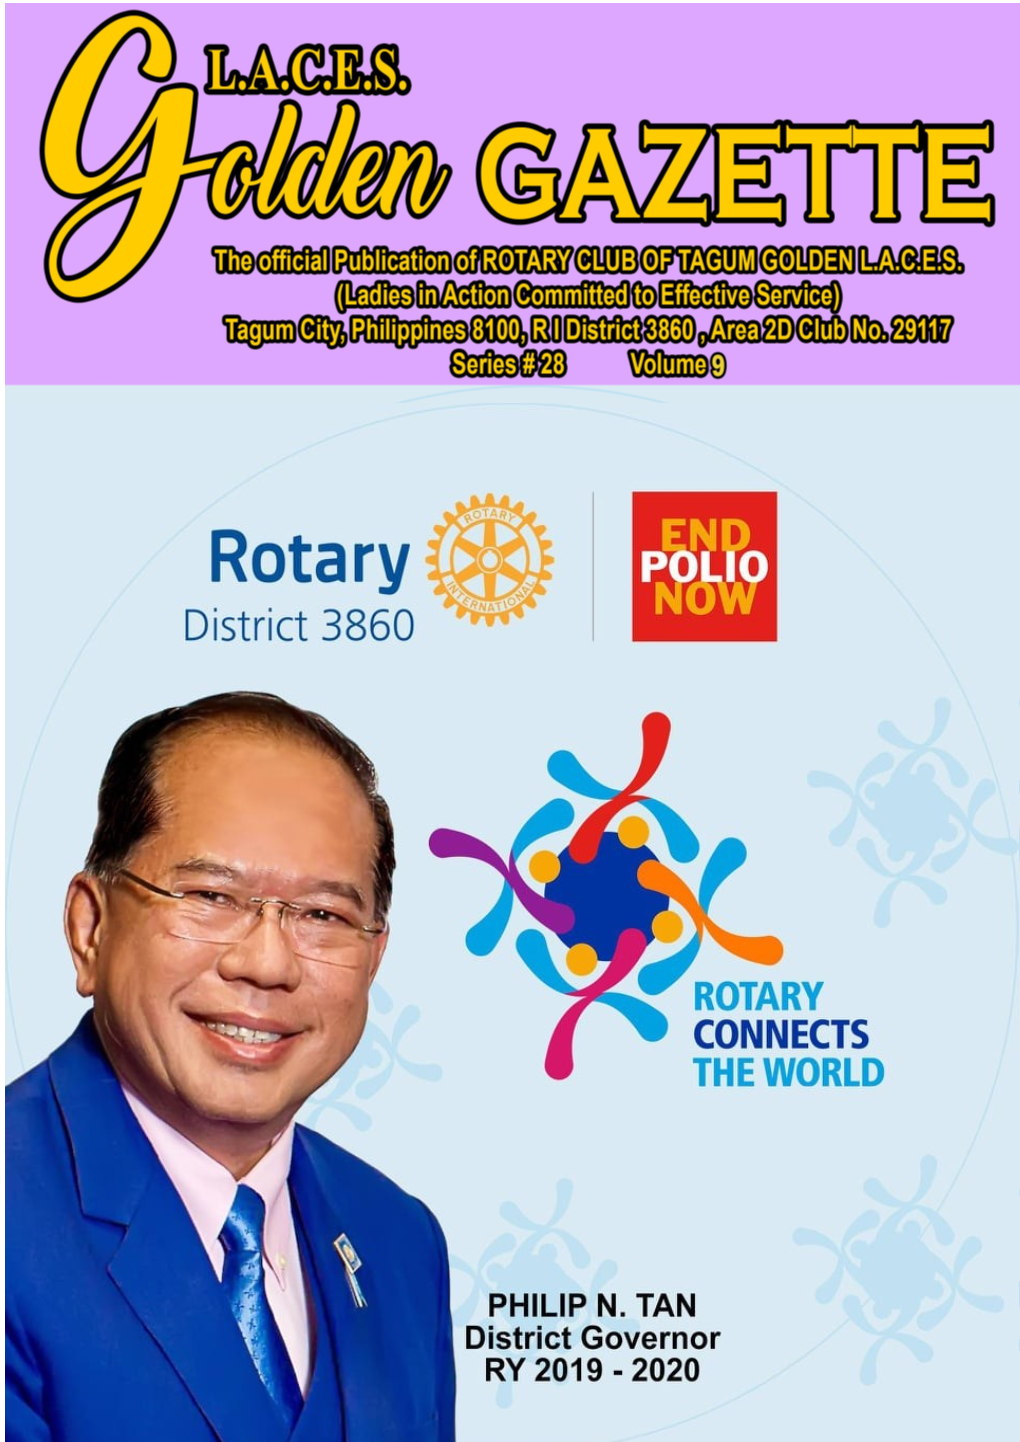 Rotary Club of Tagum Golden Laces History